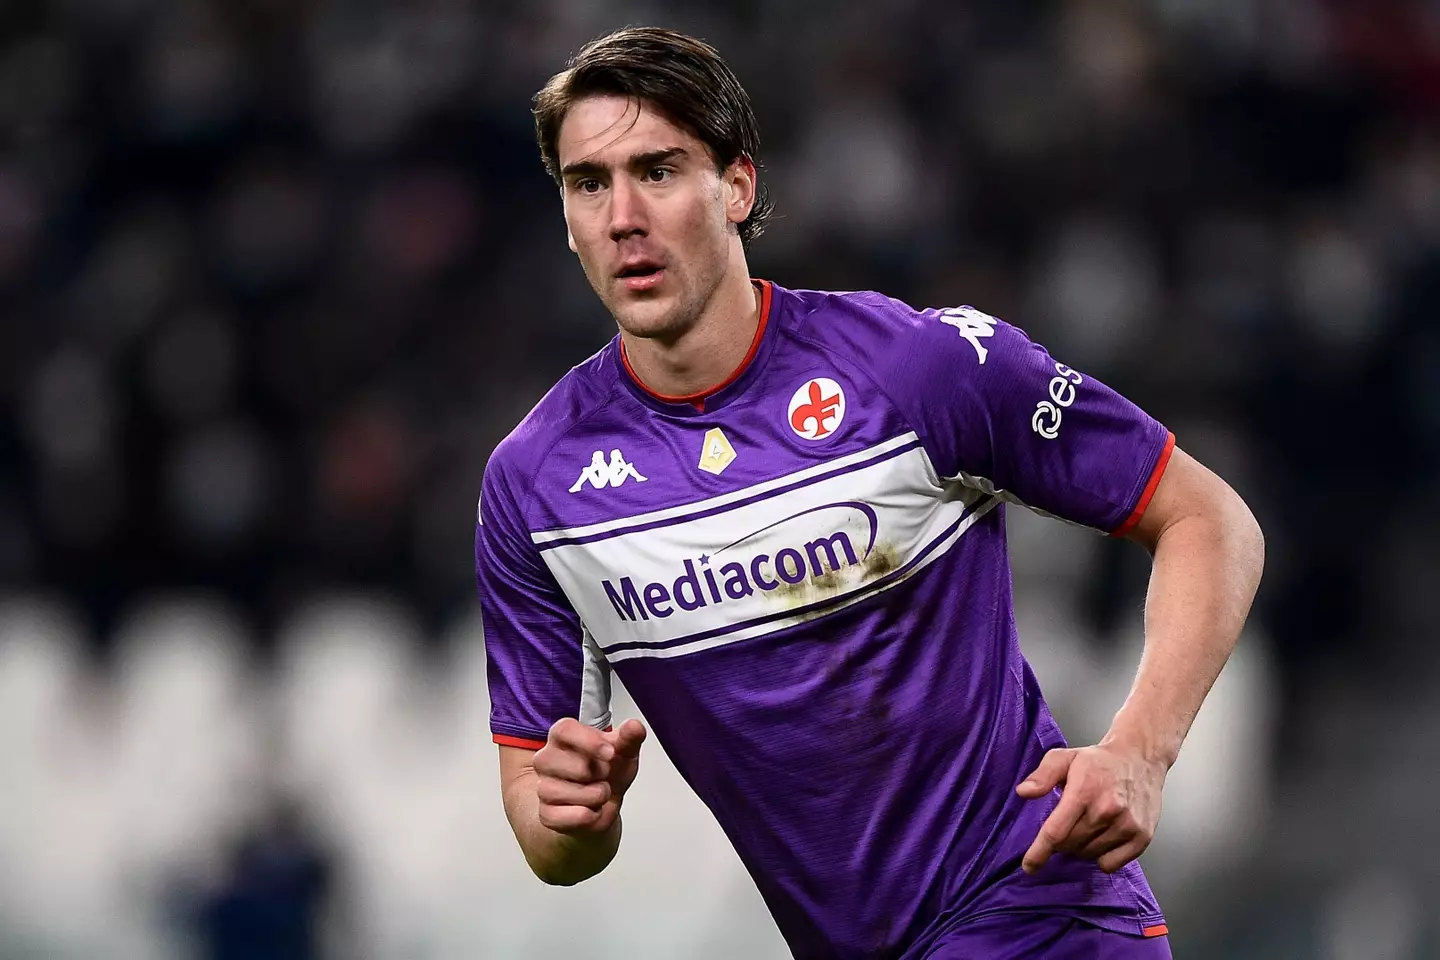 Vlahovic has scored 16 goals in 19 games for Fiorentina in Serie A this season (Image: Alamy)